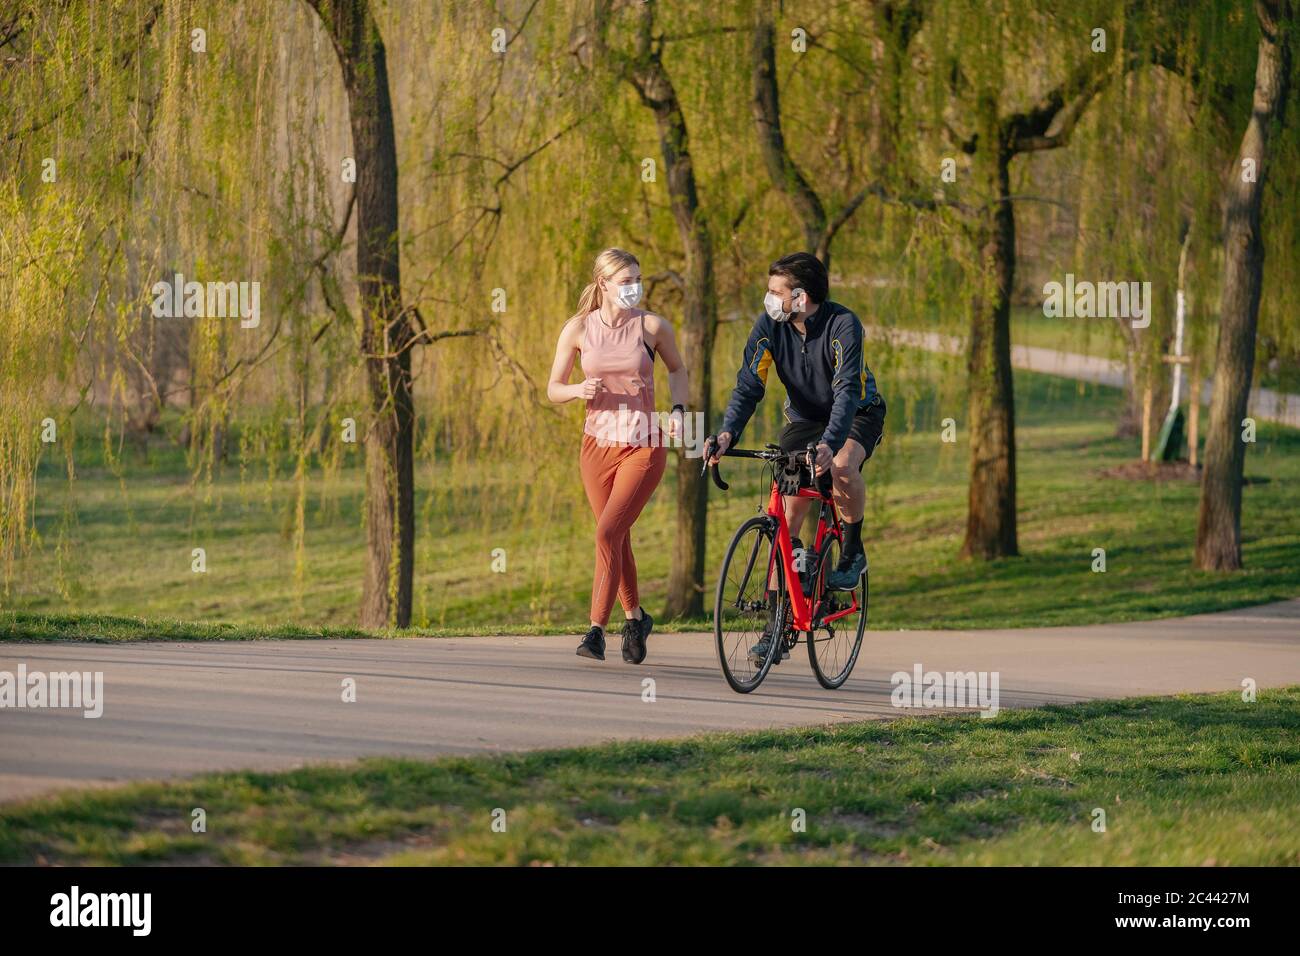 Man cycling by woman jogging on footpath at public park during COVID-19 Stock Photo